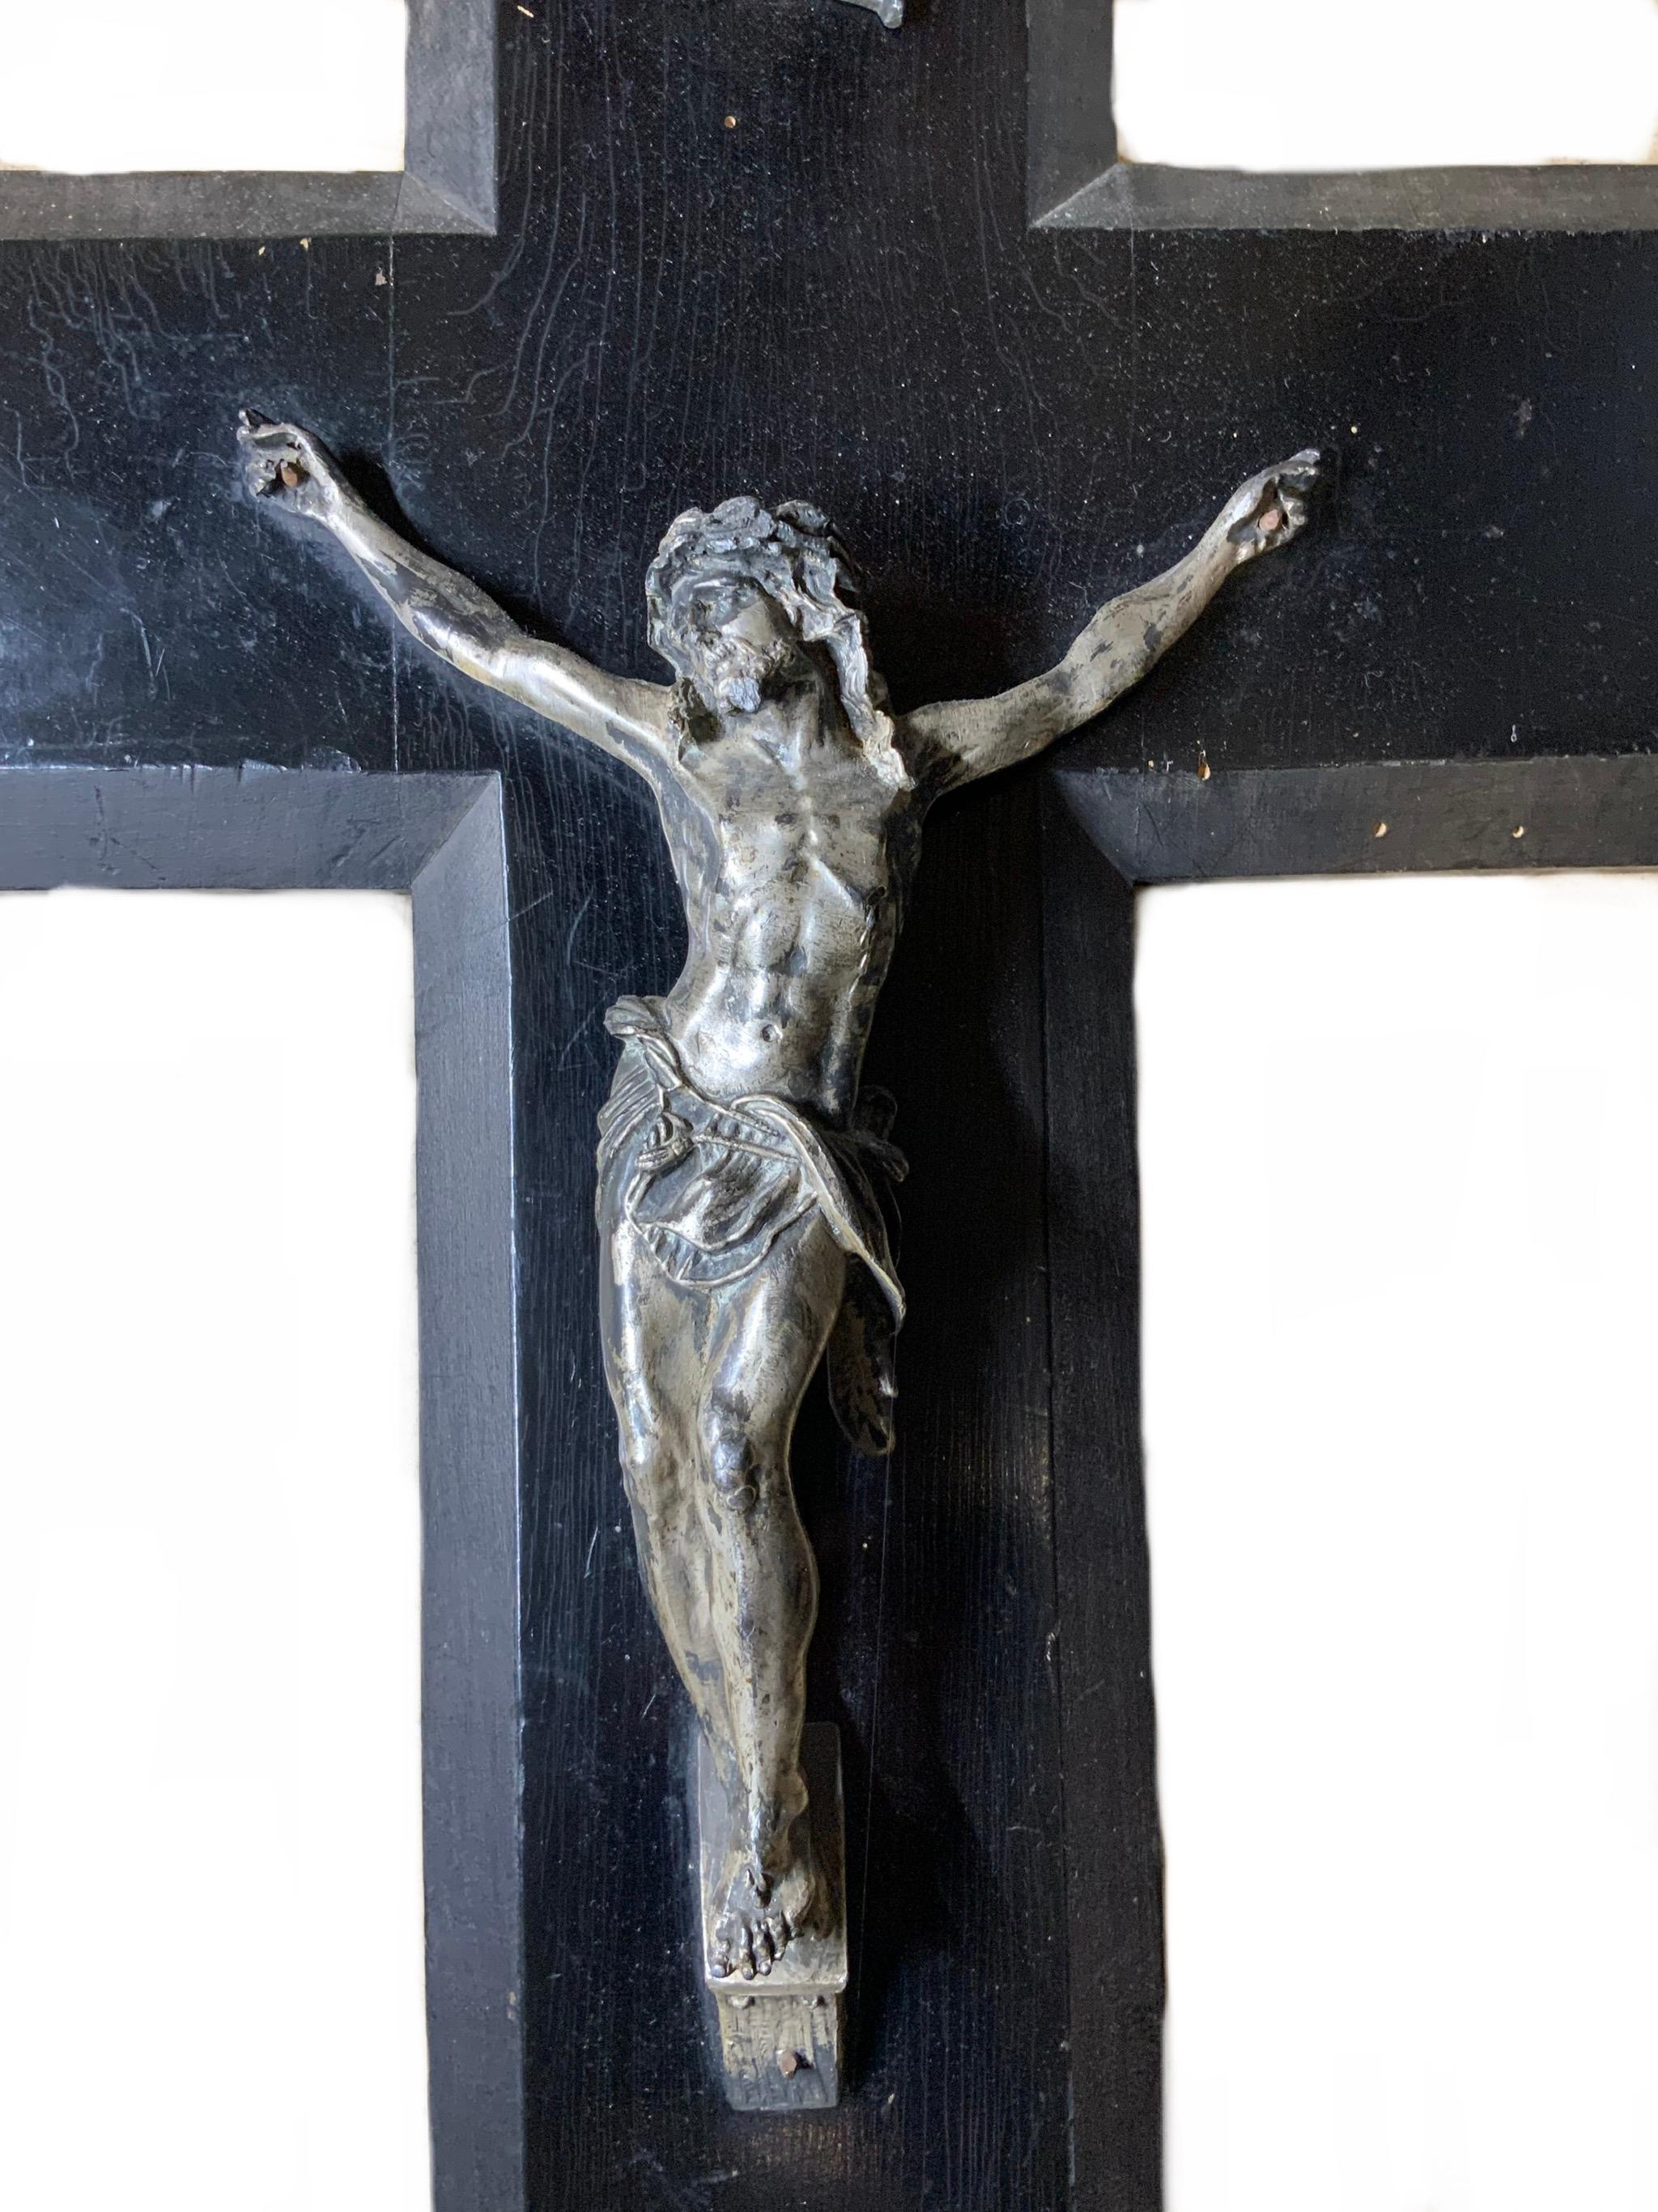 This is a wall crucifix benetier made of wood and metal. The wood cross is hand painted black. The Jesus Christ and the blessing bowl are made of silver tone metal that is adorned with embossed foliage. Above the Jesus Christ there is a scroll with